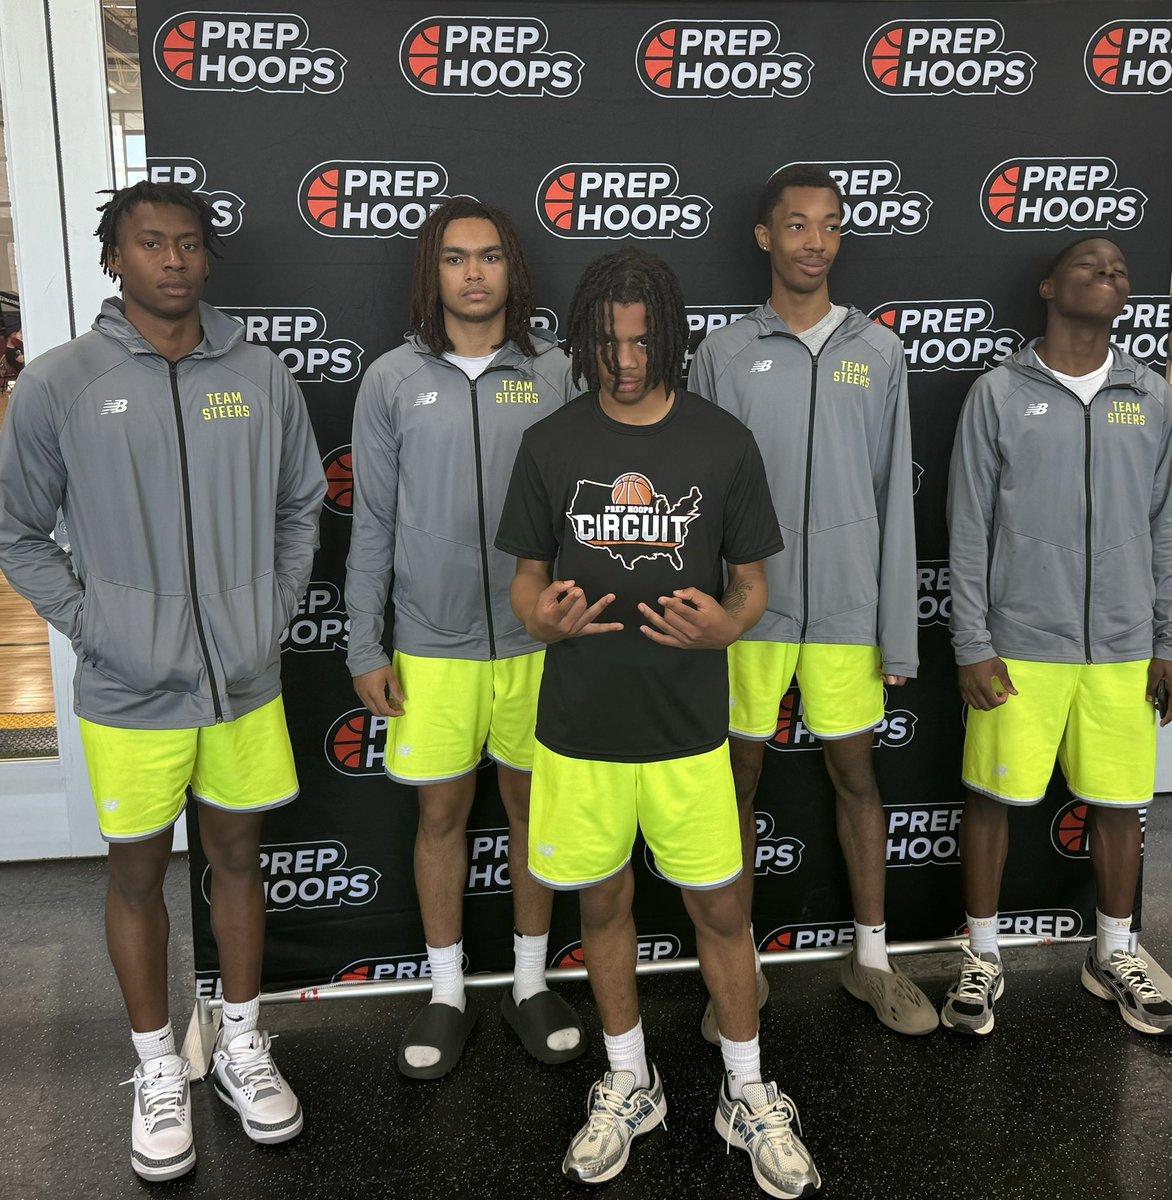 Great Weekend @PHCircuit #PrephoopsLive in Chicago, Illinois. We’re a Top 5 program on the circuit. This group of 5️⃣ represents our concepts, work ethic and team play. Lead by 6’4 @Miles_Whxte who drop 35 against NDP. #Useeit👀 @ESUWarriors @LeMoyneMBB #NEBCELITE 11-1 in ‘24